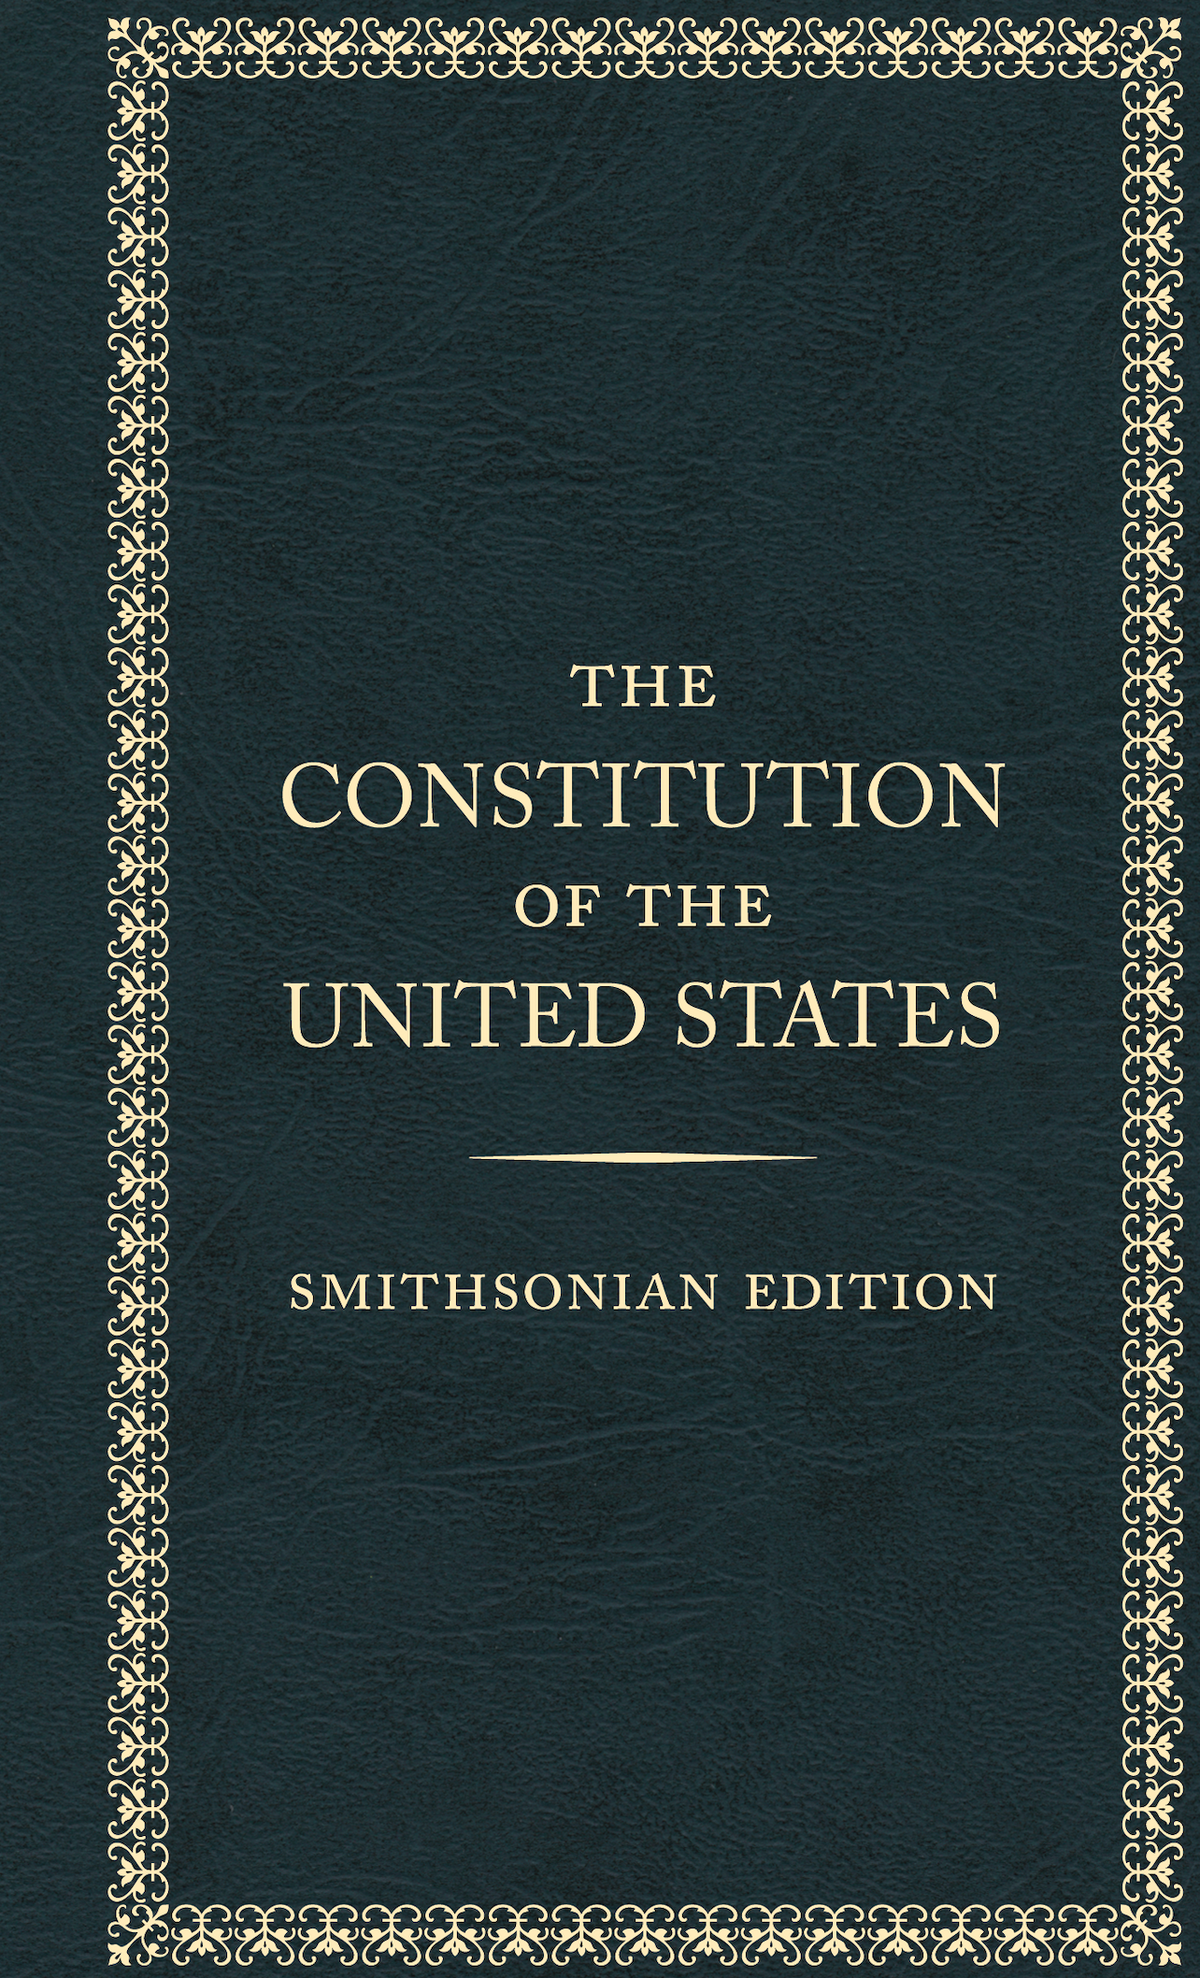 Smithsonian edition of The Constitution of the US Book